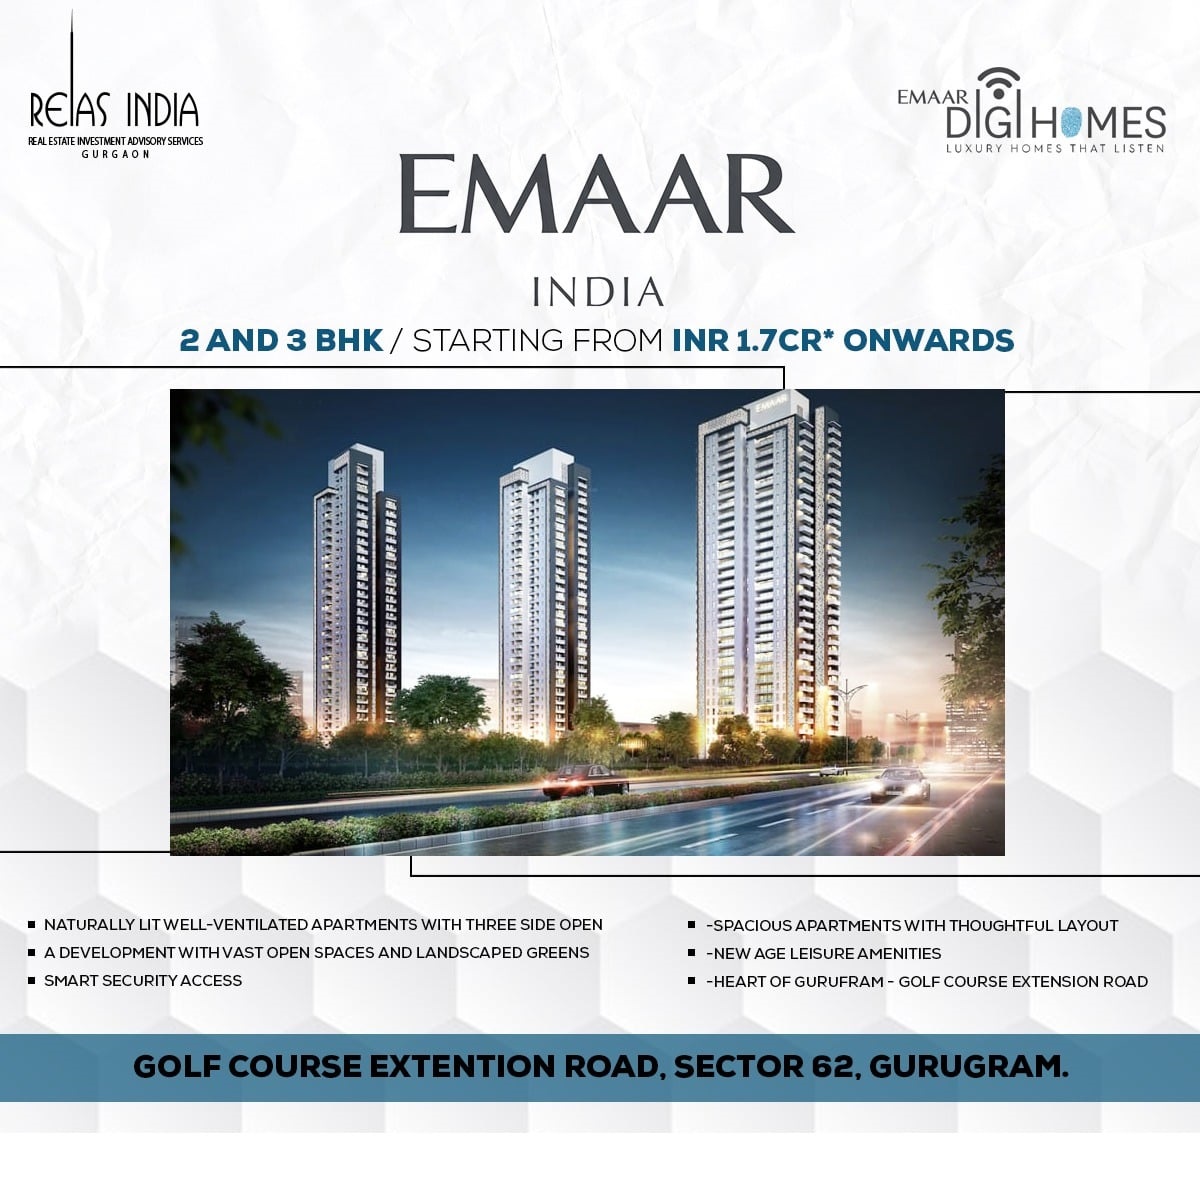 Book 2 and 3 BHK starting from Rs 1.7Cr onwards at Emaar Digi Homes in Gurgaon Update